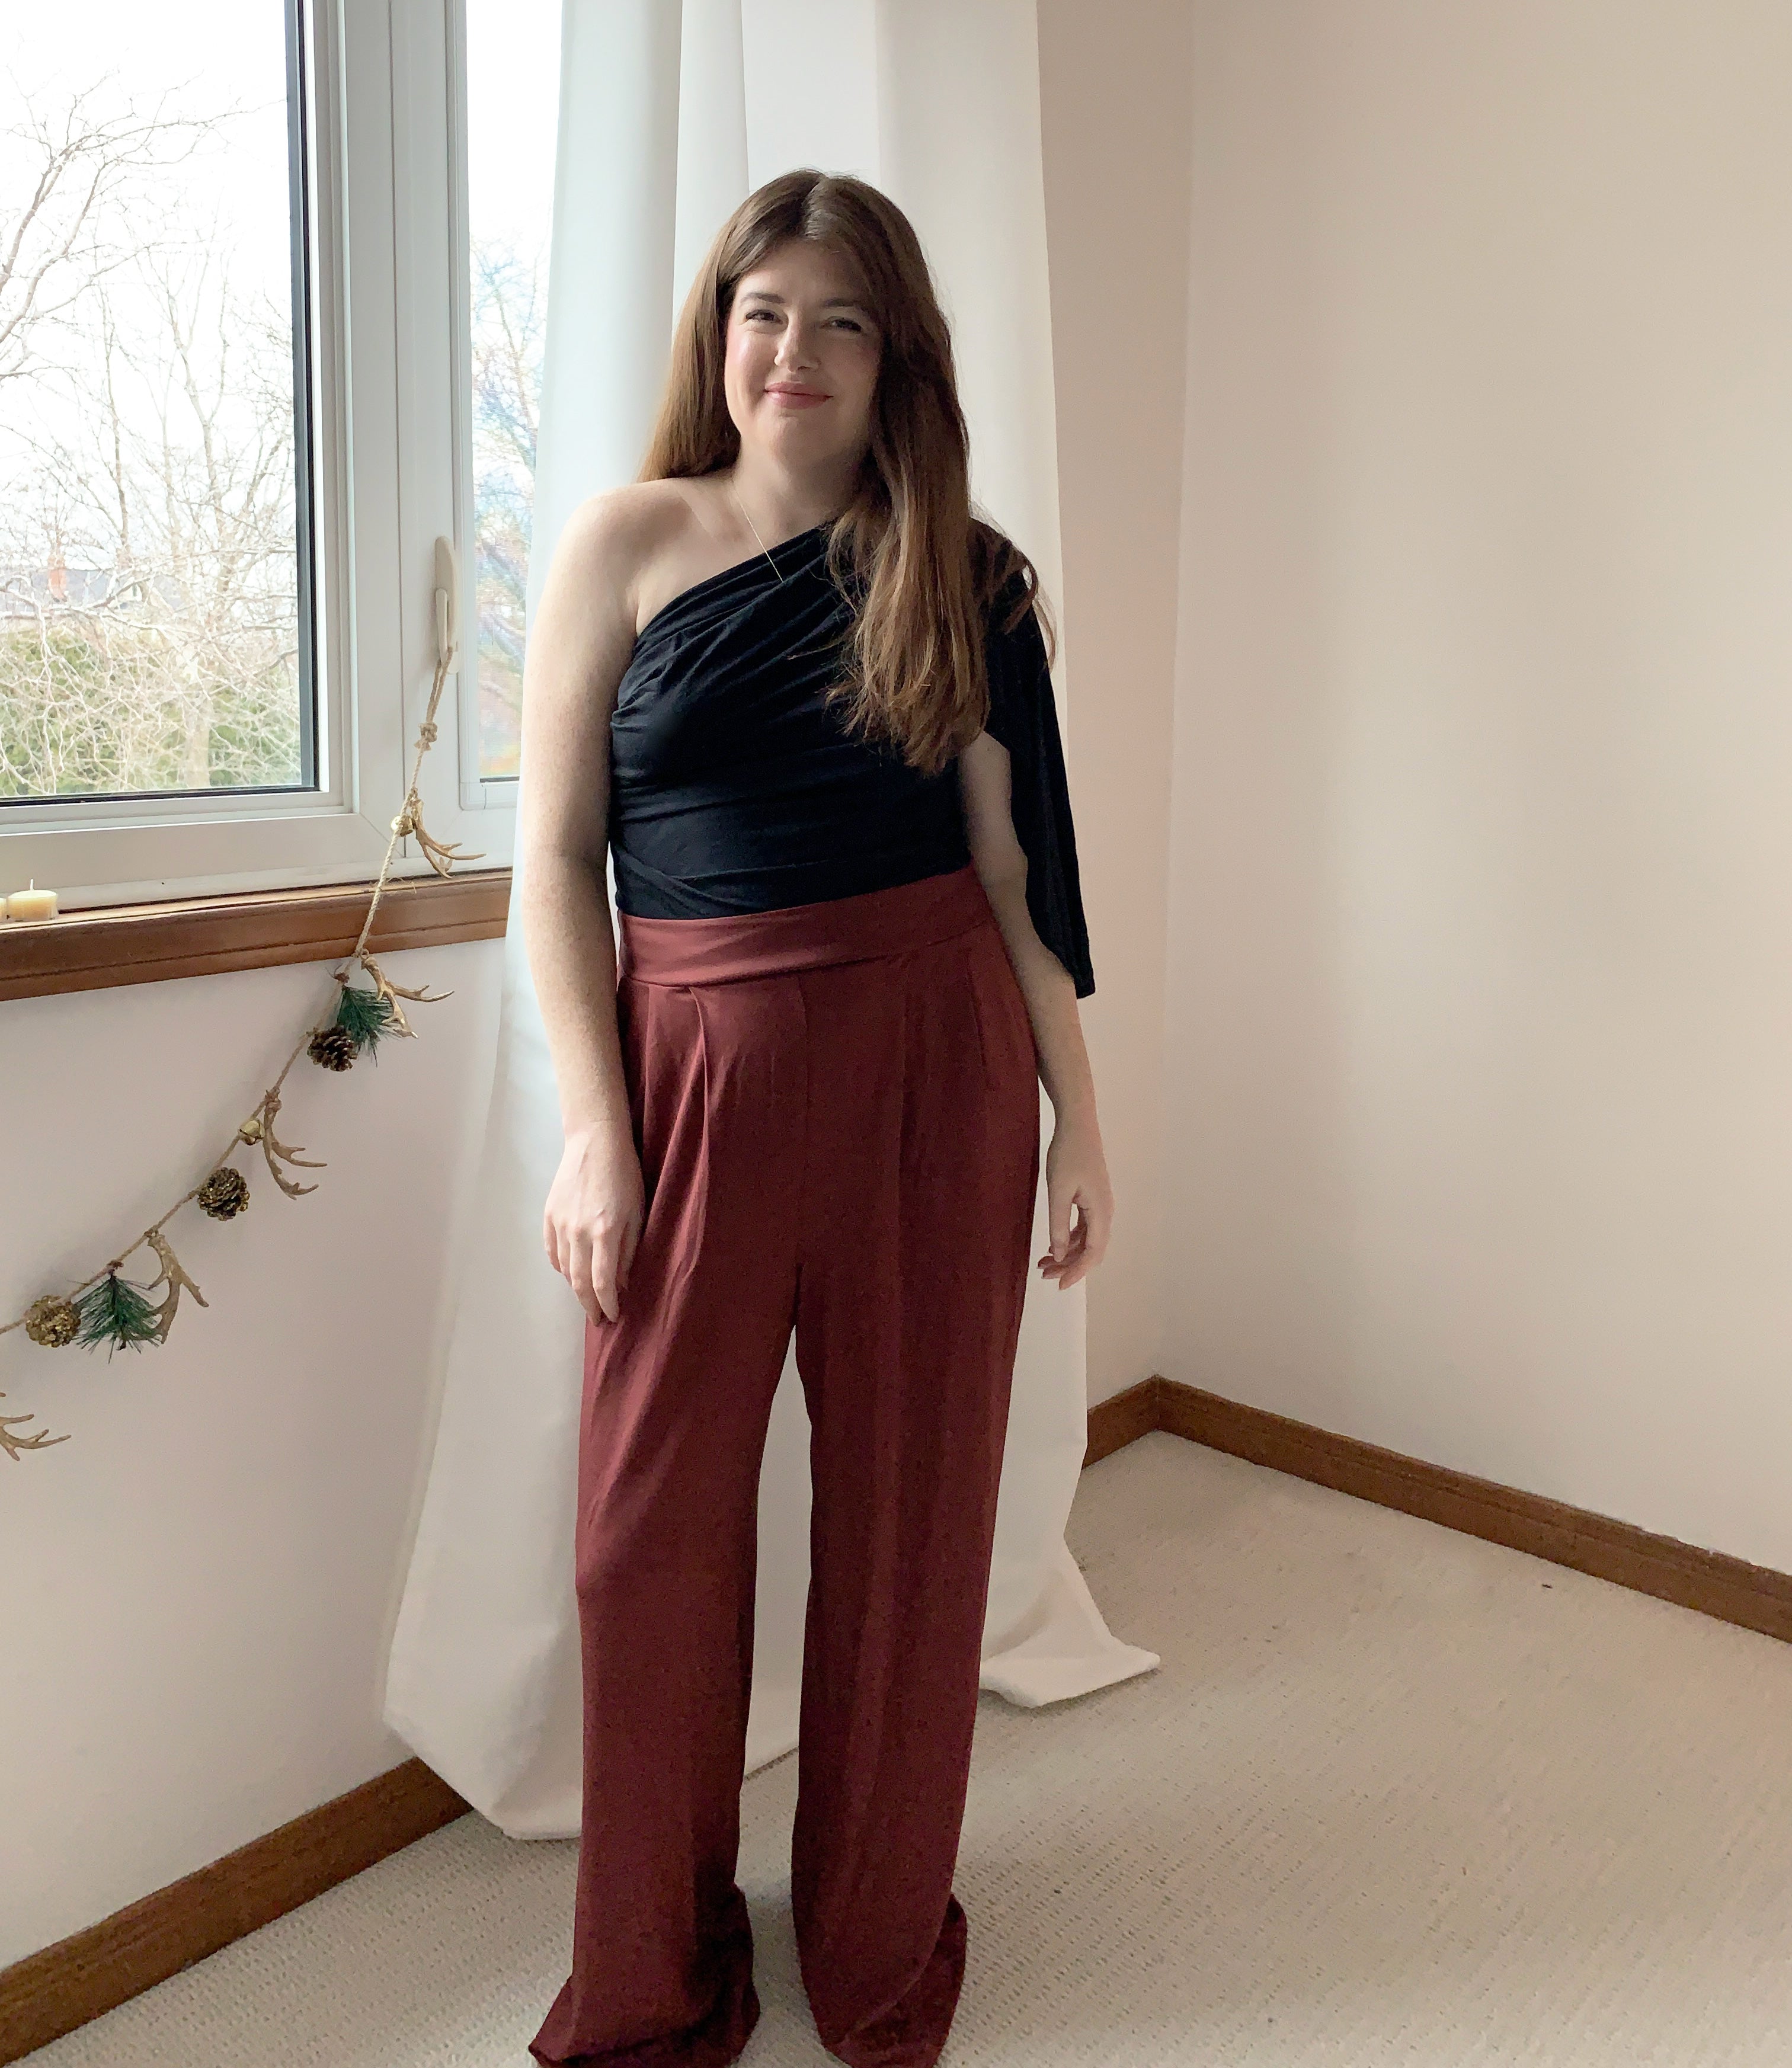 Encircled Style: 3 Ways to Rock Comfy Wide Leg Pants This Holiday